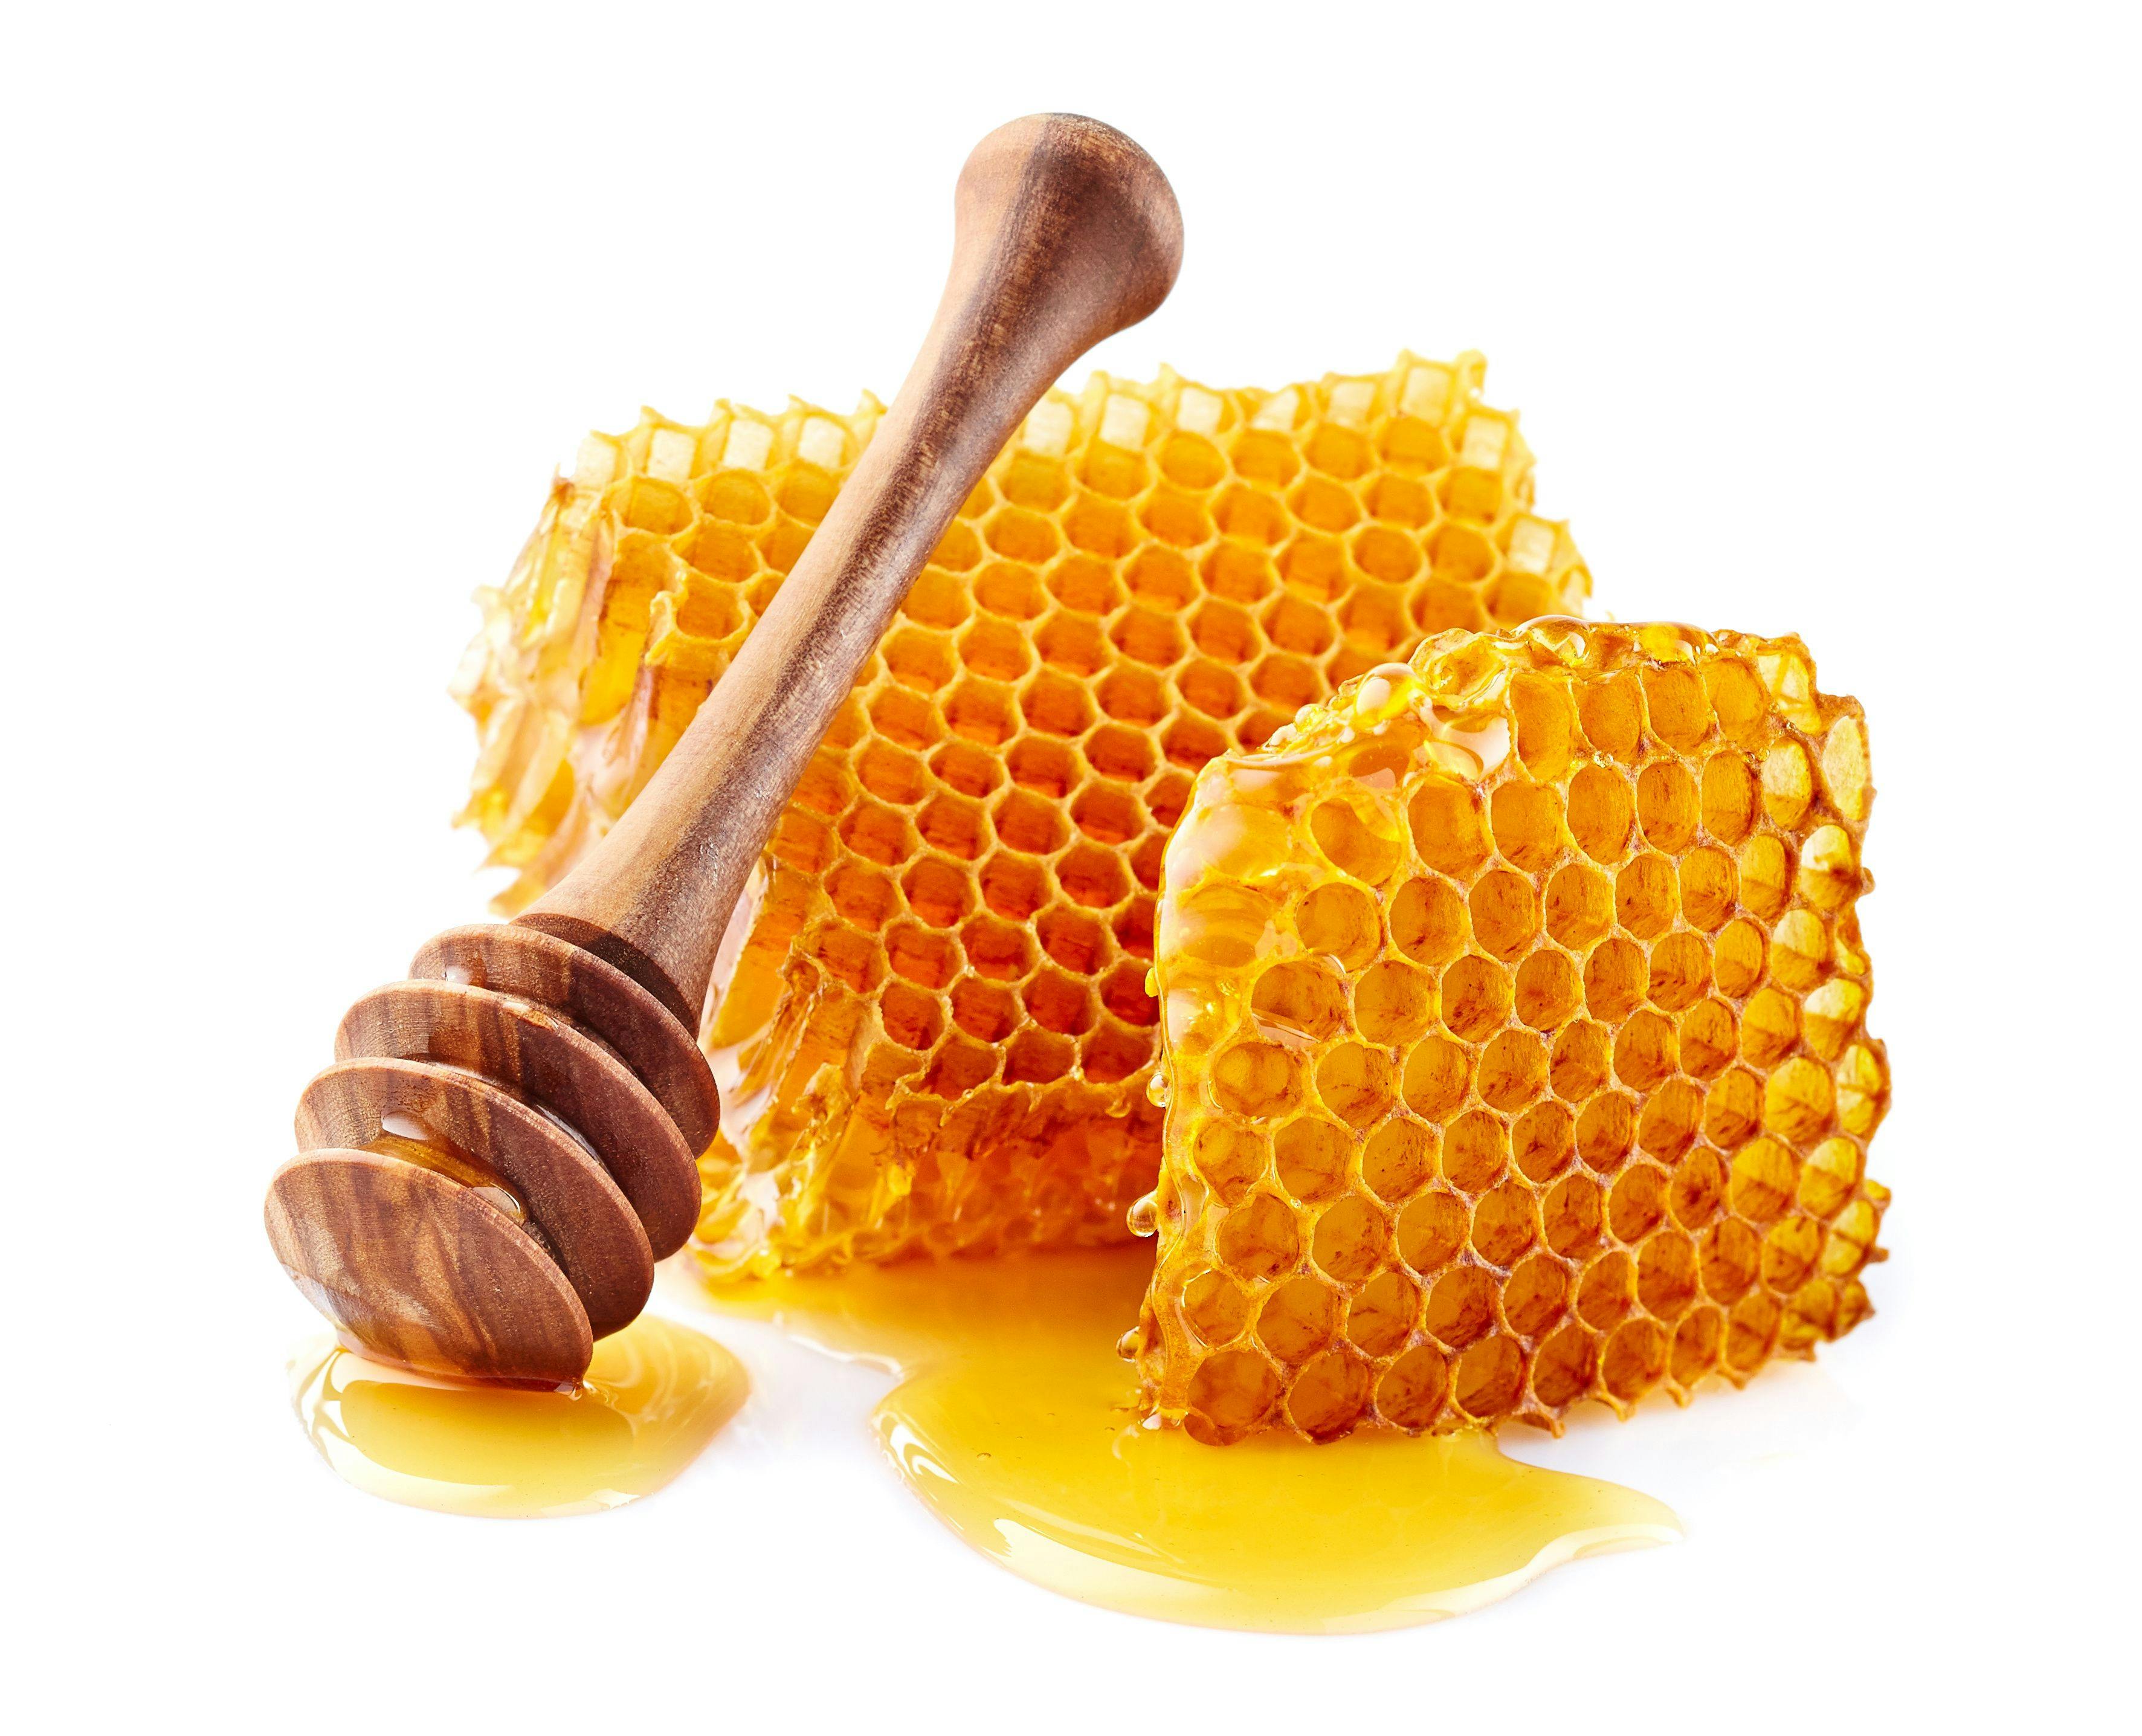 New Study Champions Honey to Help Wounds Heal